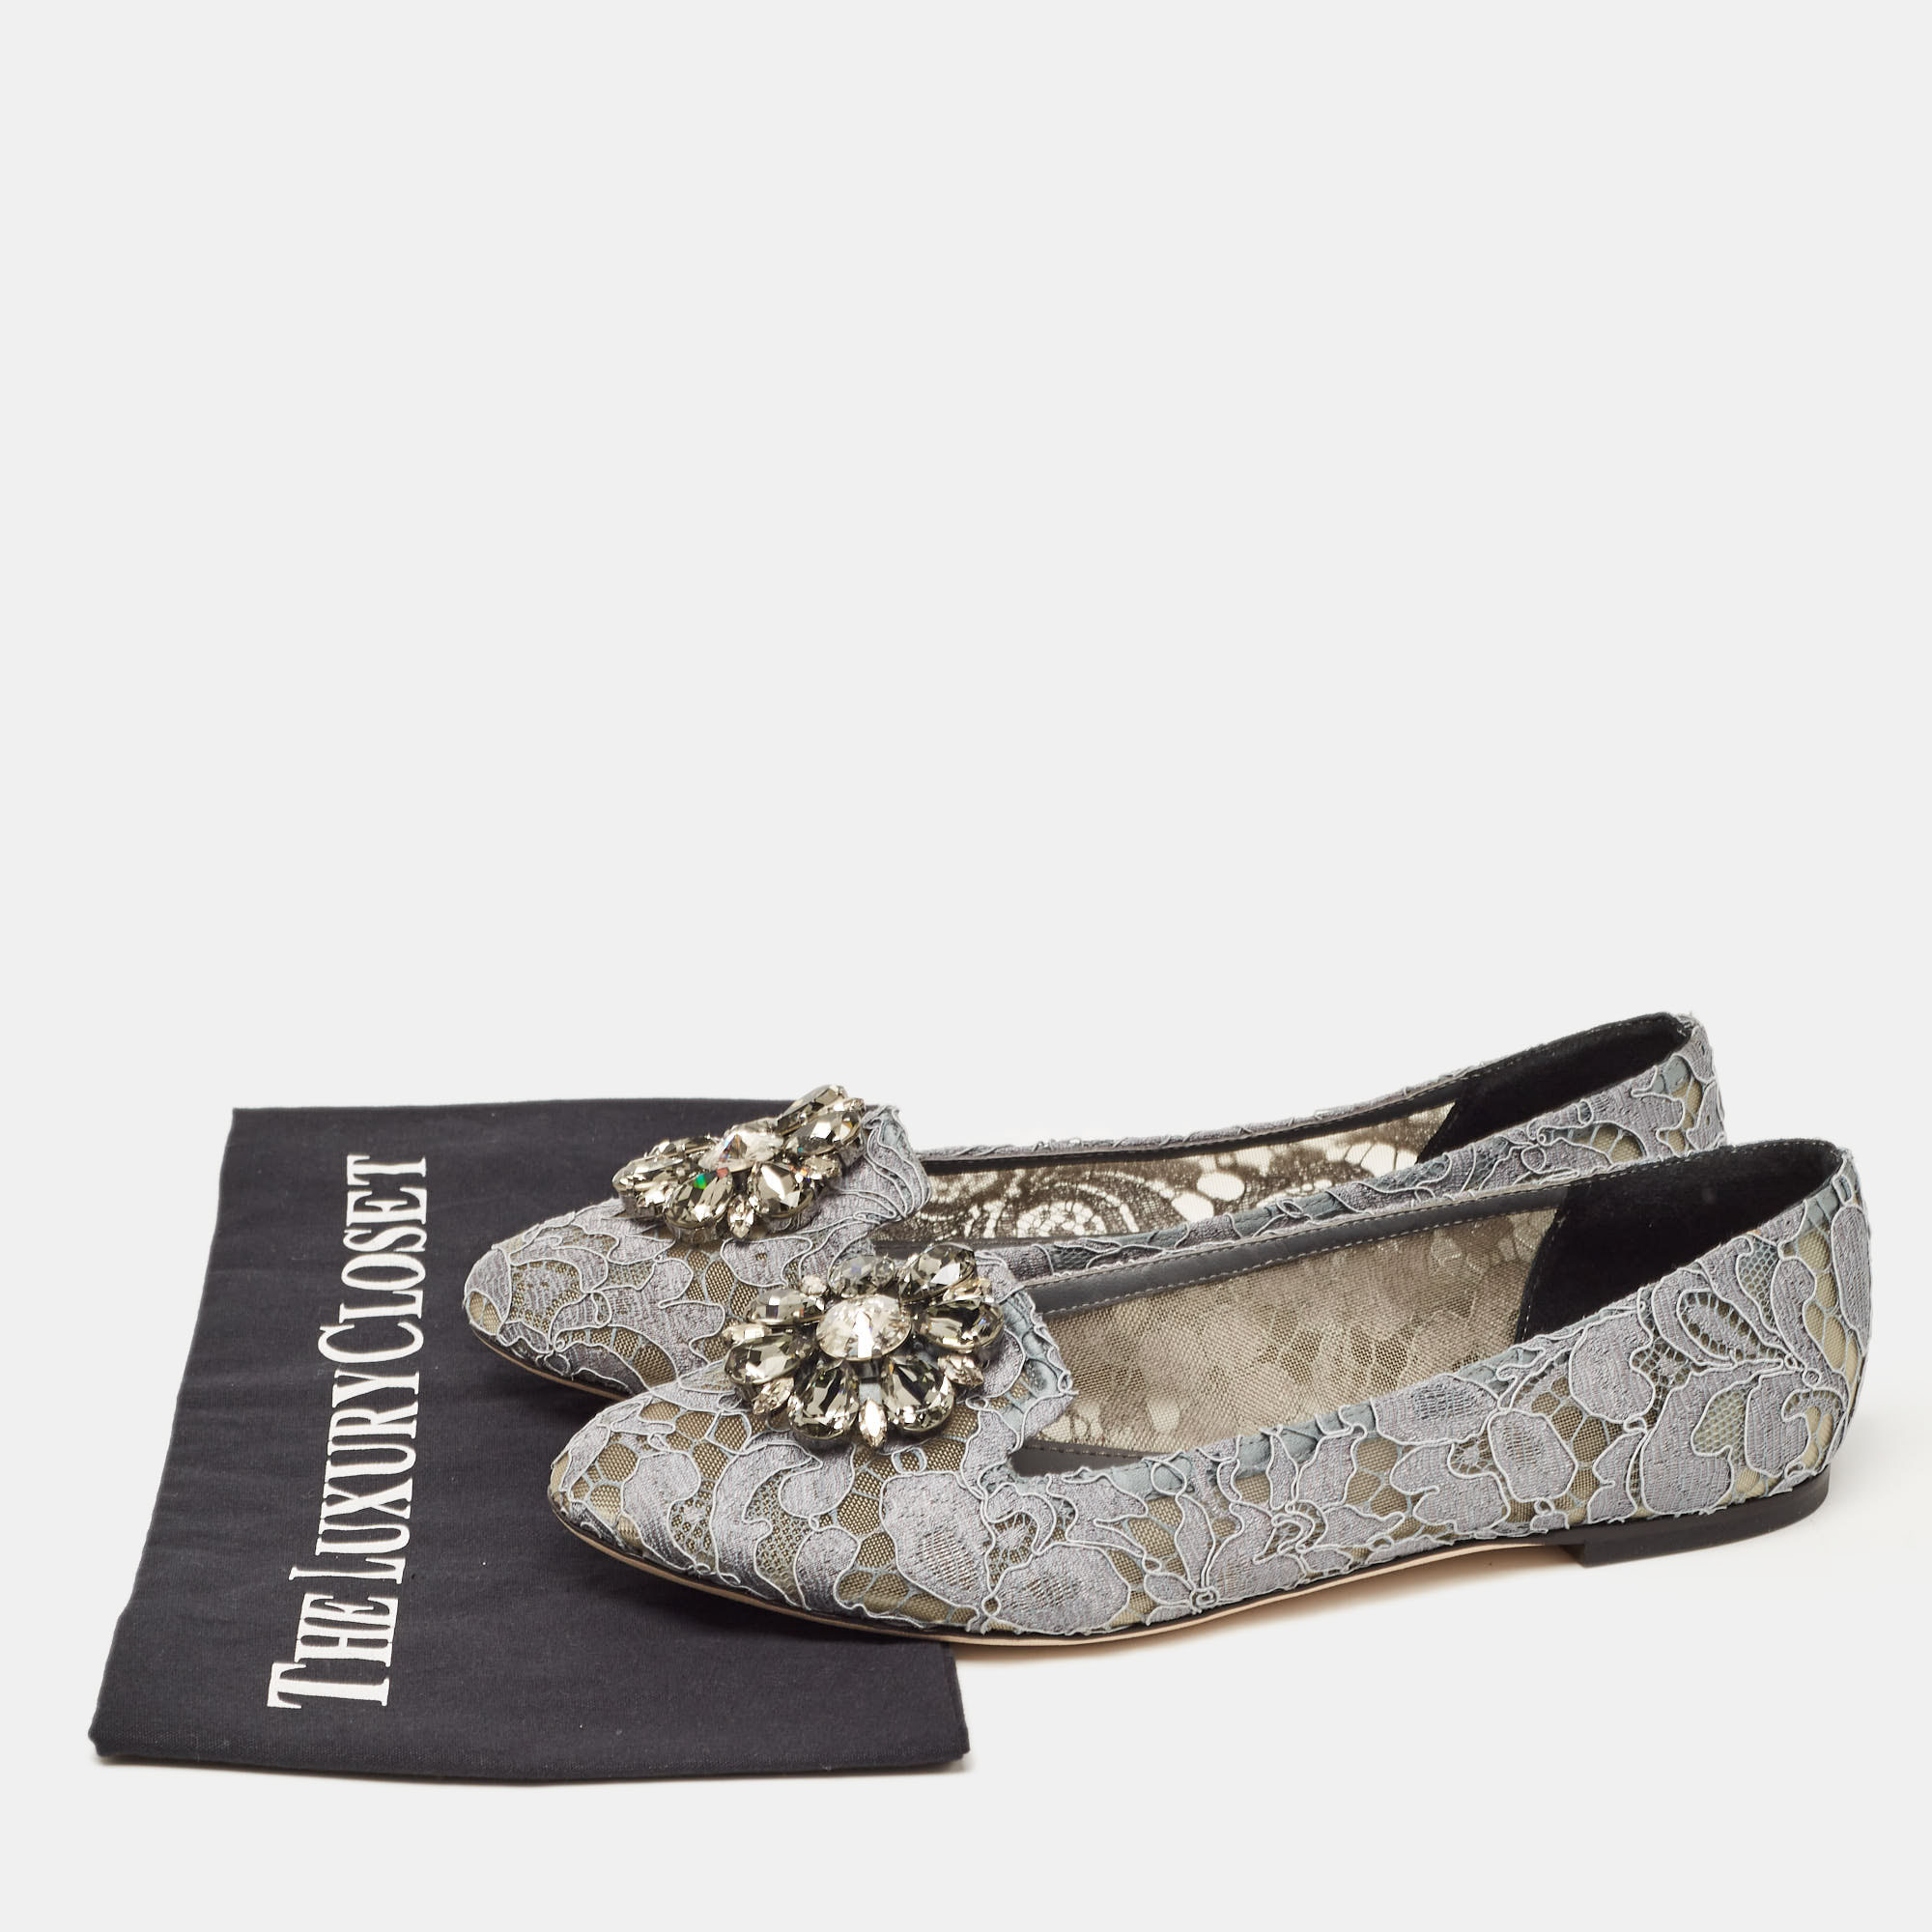 Dolce & Gabbana Grey Lace And Mesh Bellucci Crystal Embellished Ballet Flats Size 38.5